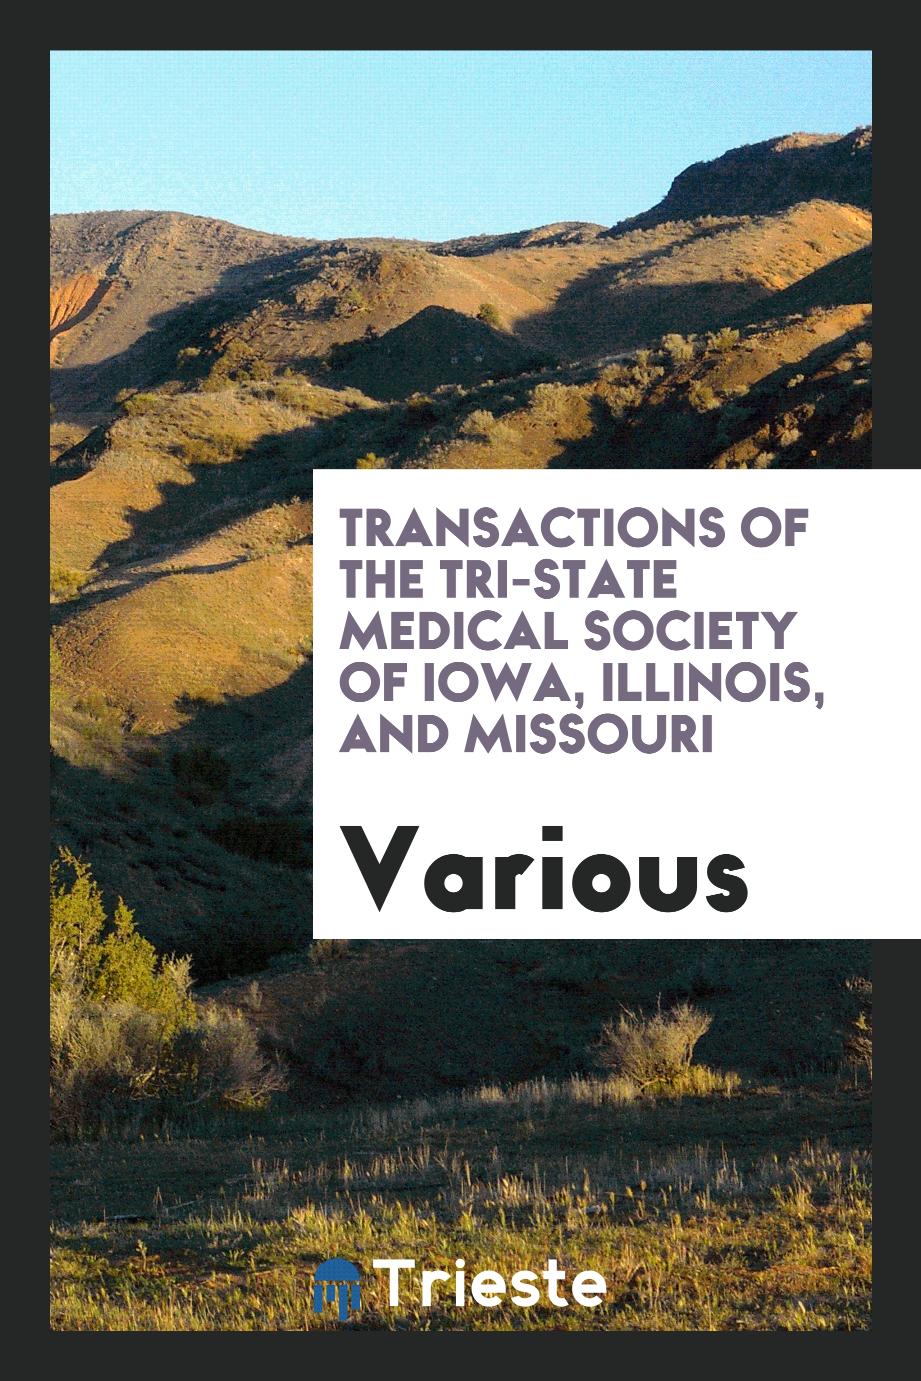 Transactions of the Tri-State Medical Society of Iowa, Illinois, and Missouri